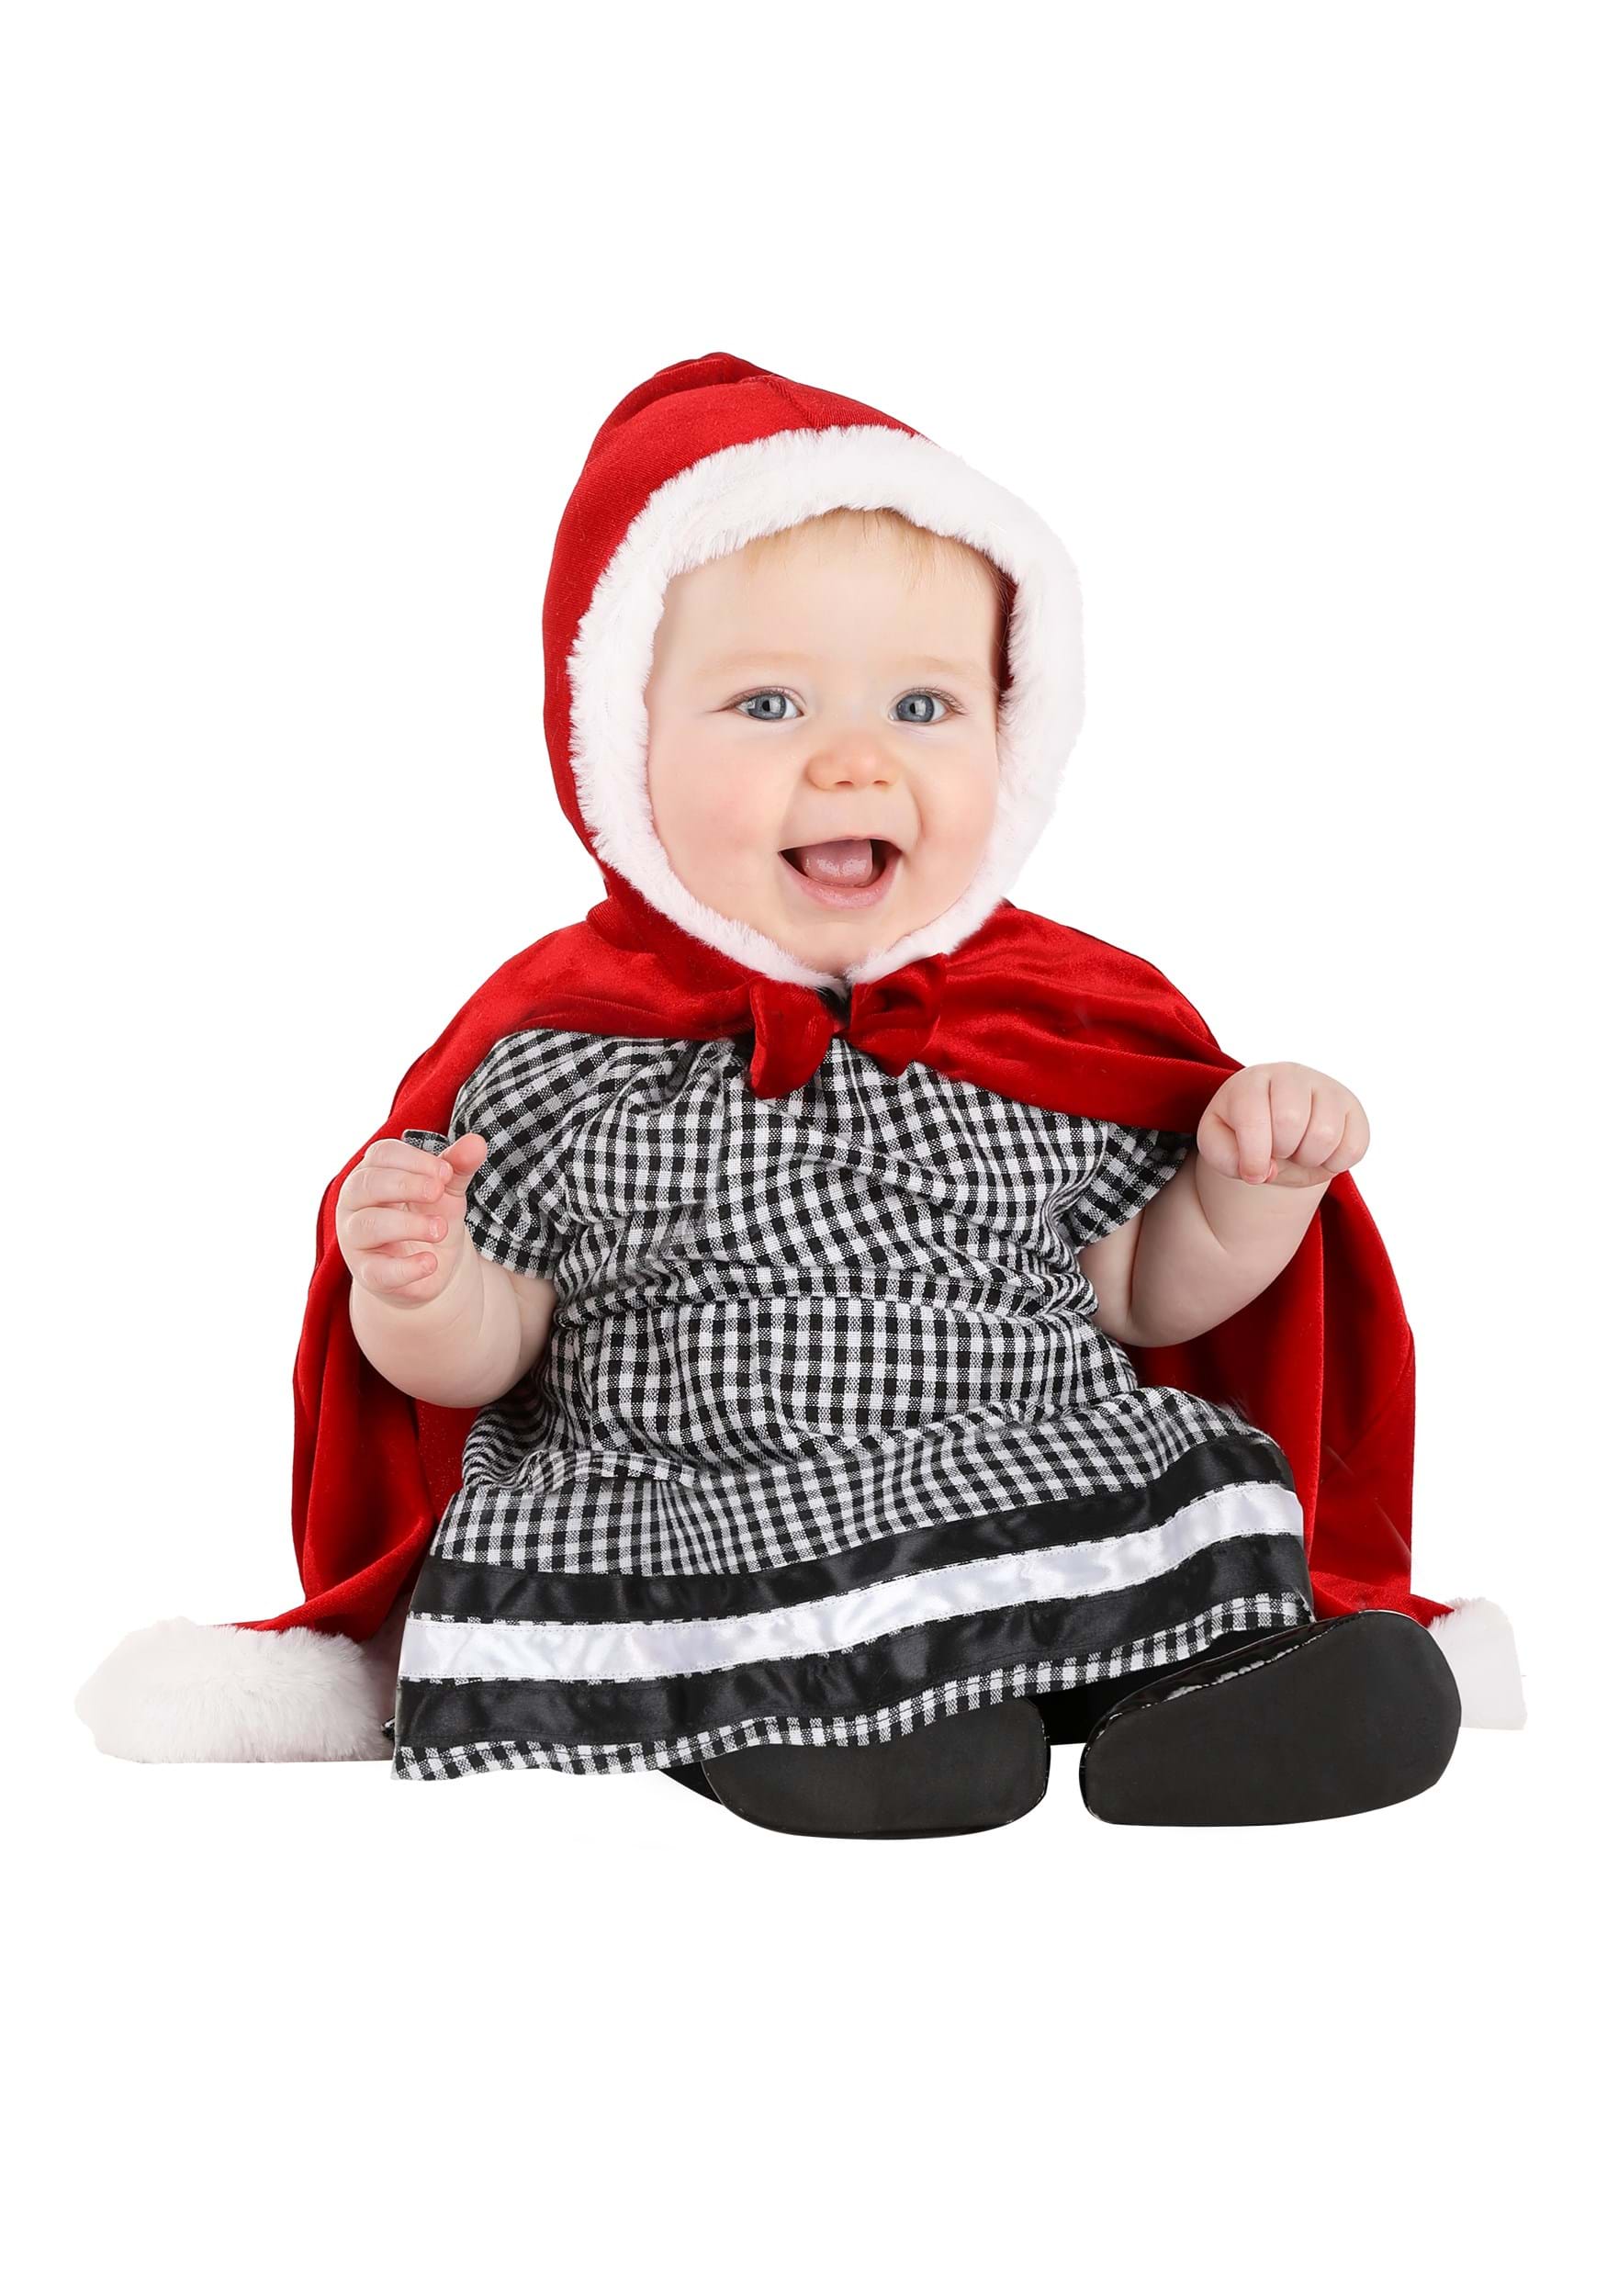 Infant Dr. Seuss Cindy Lou Who Costume | How the Grinch Stole Christmas Costumes -  FUN Costumes